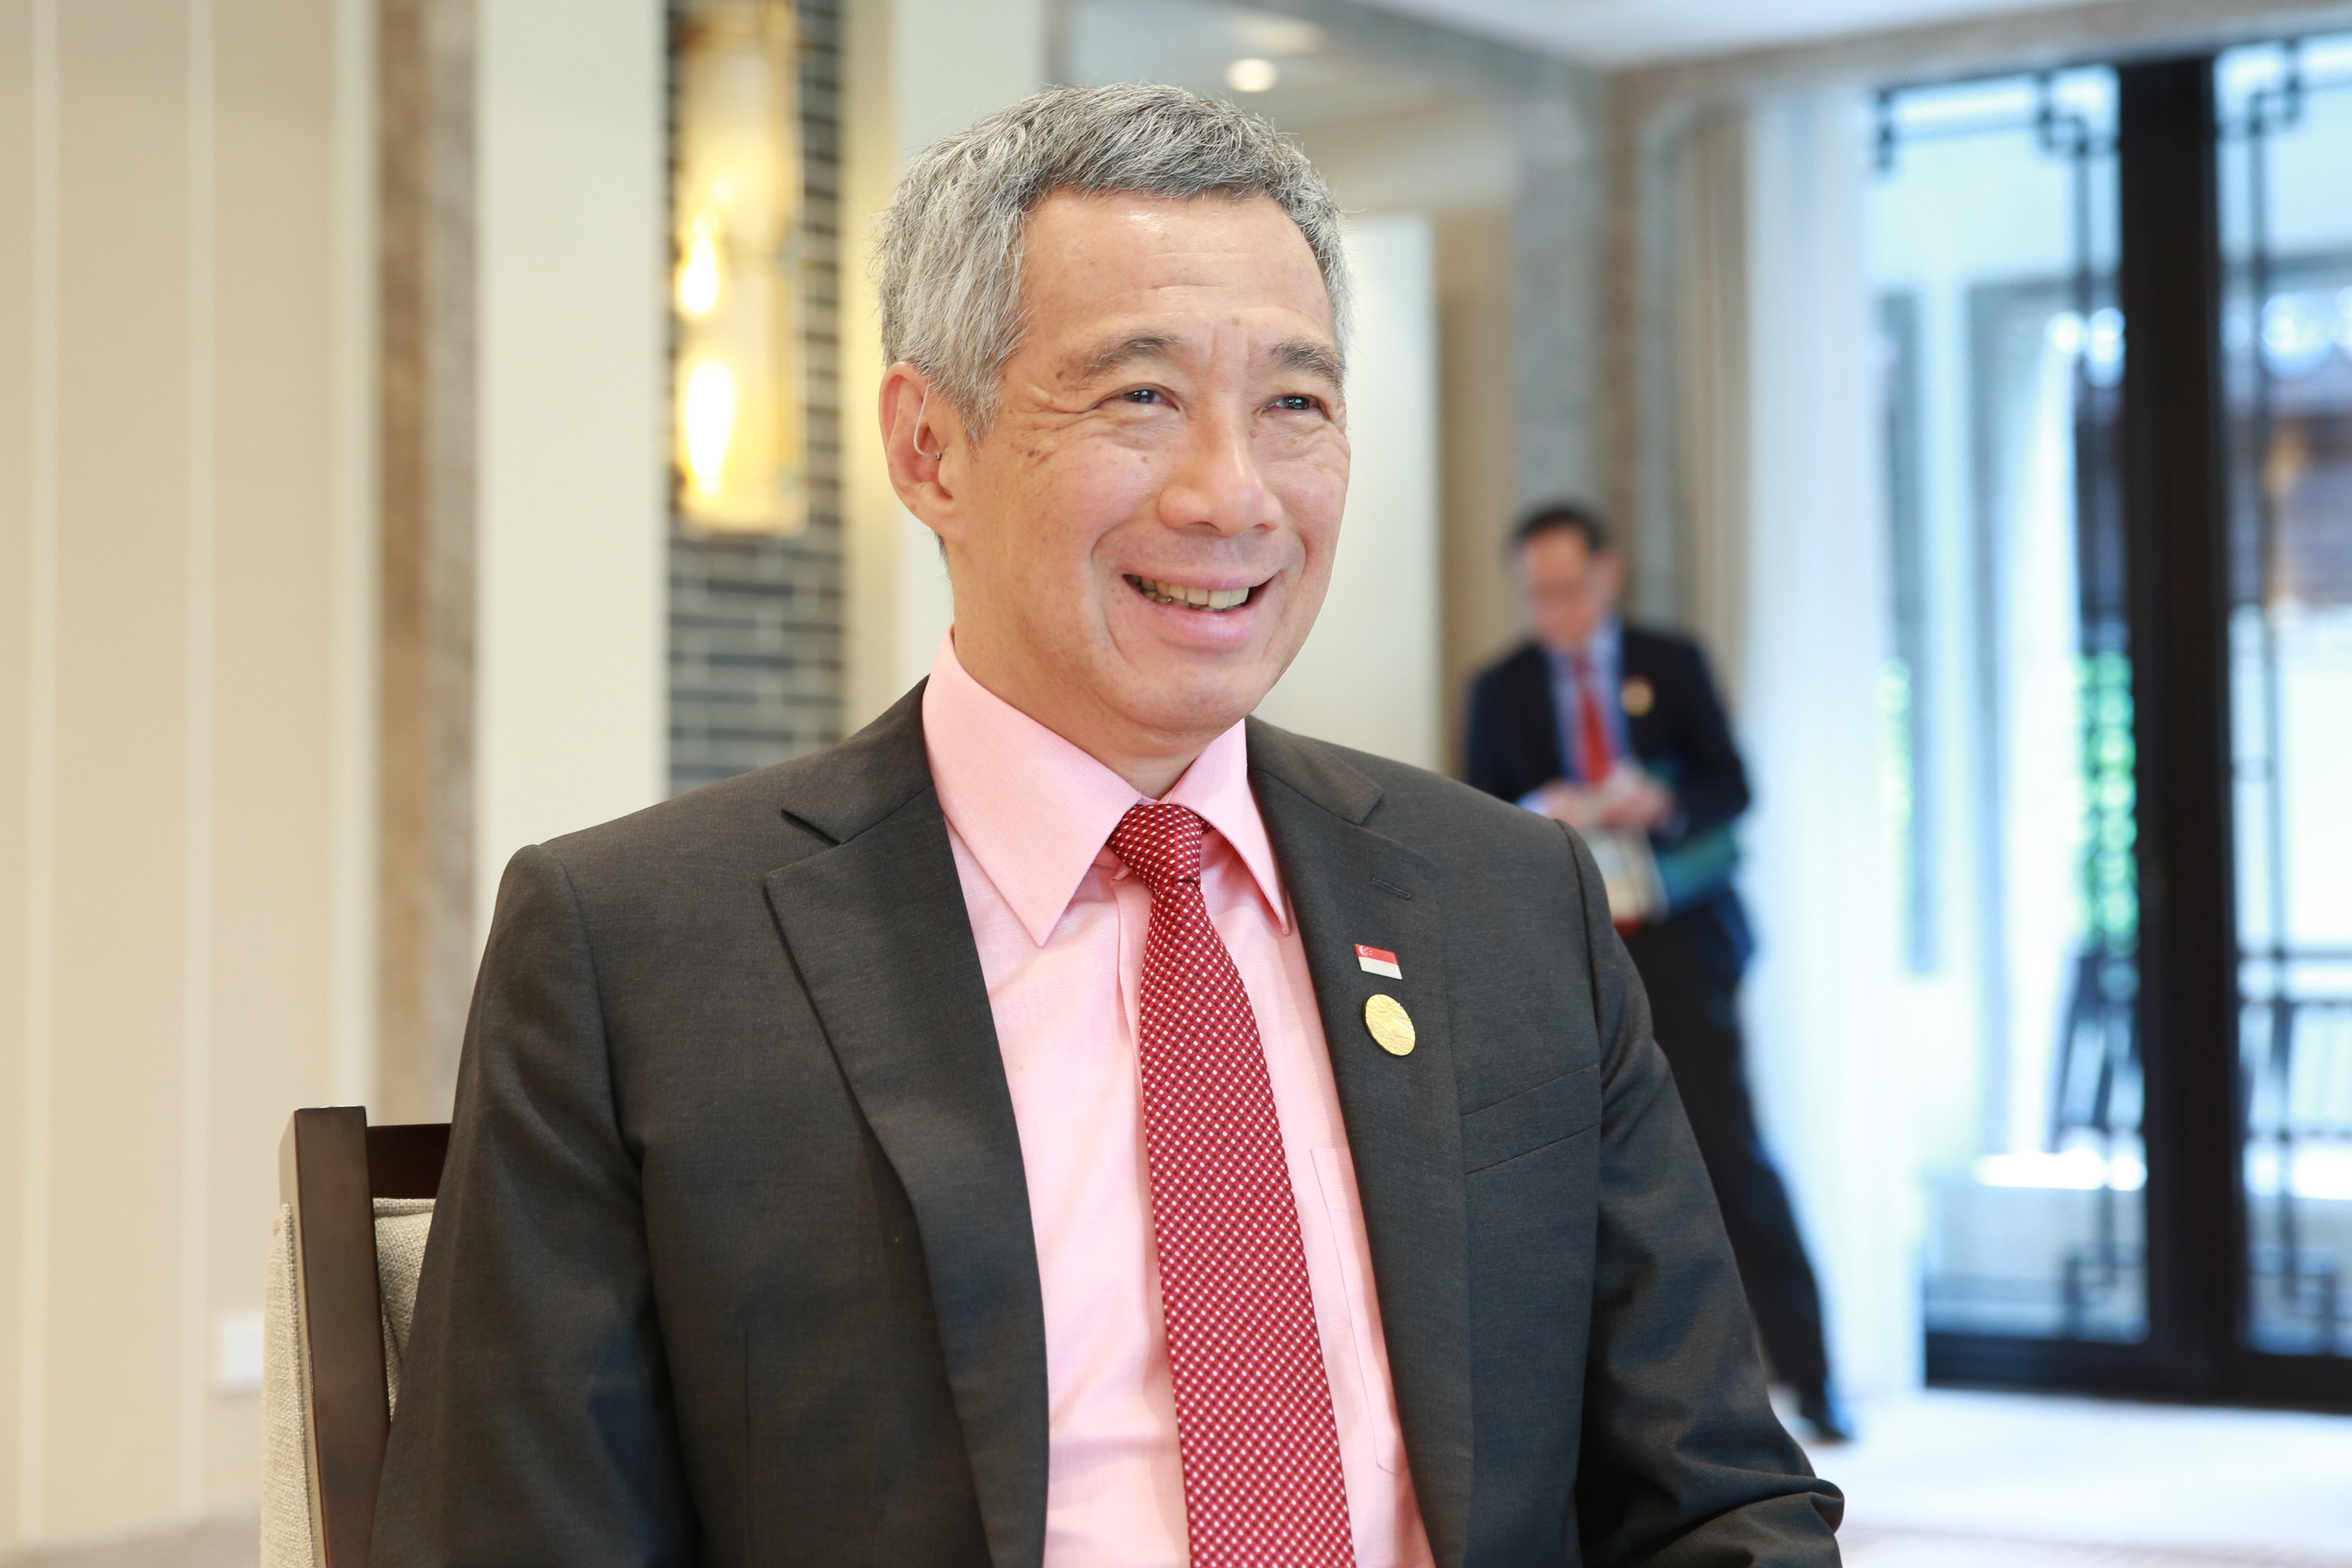 Transcript of PM Lee Hsien Loong's interview with Caijing